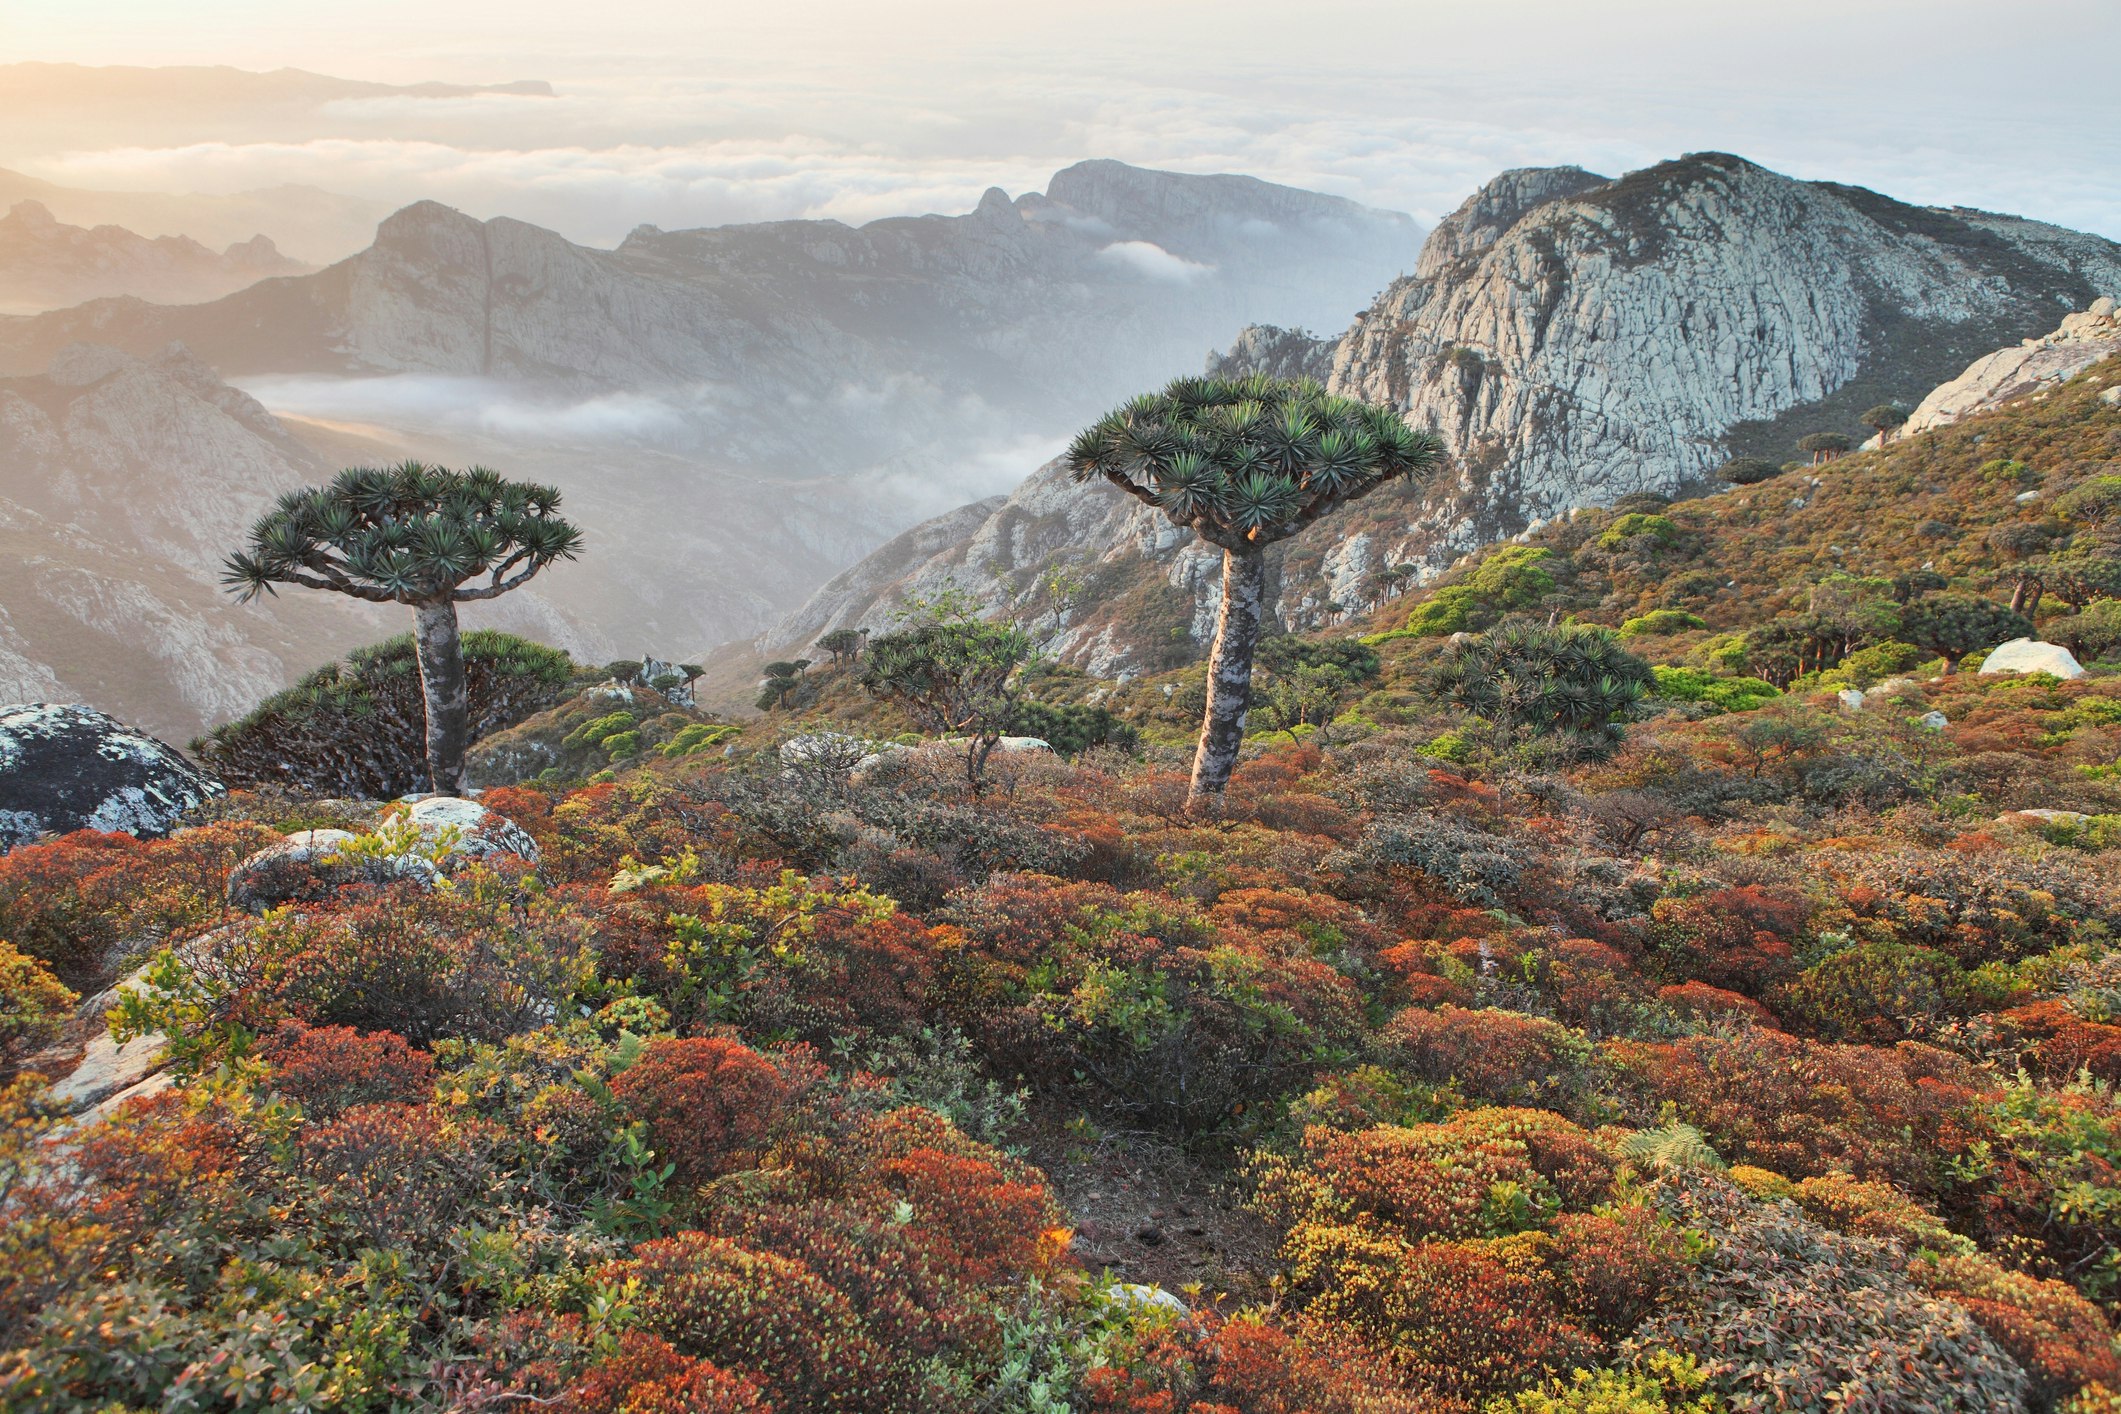 Dragon trees dot the rocky landscape of Socotra Island in front of a hazy range of mountains